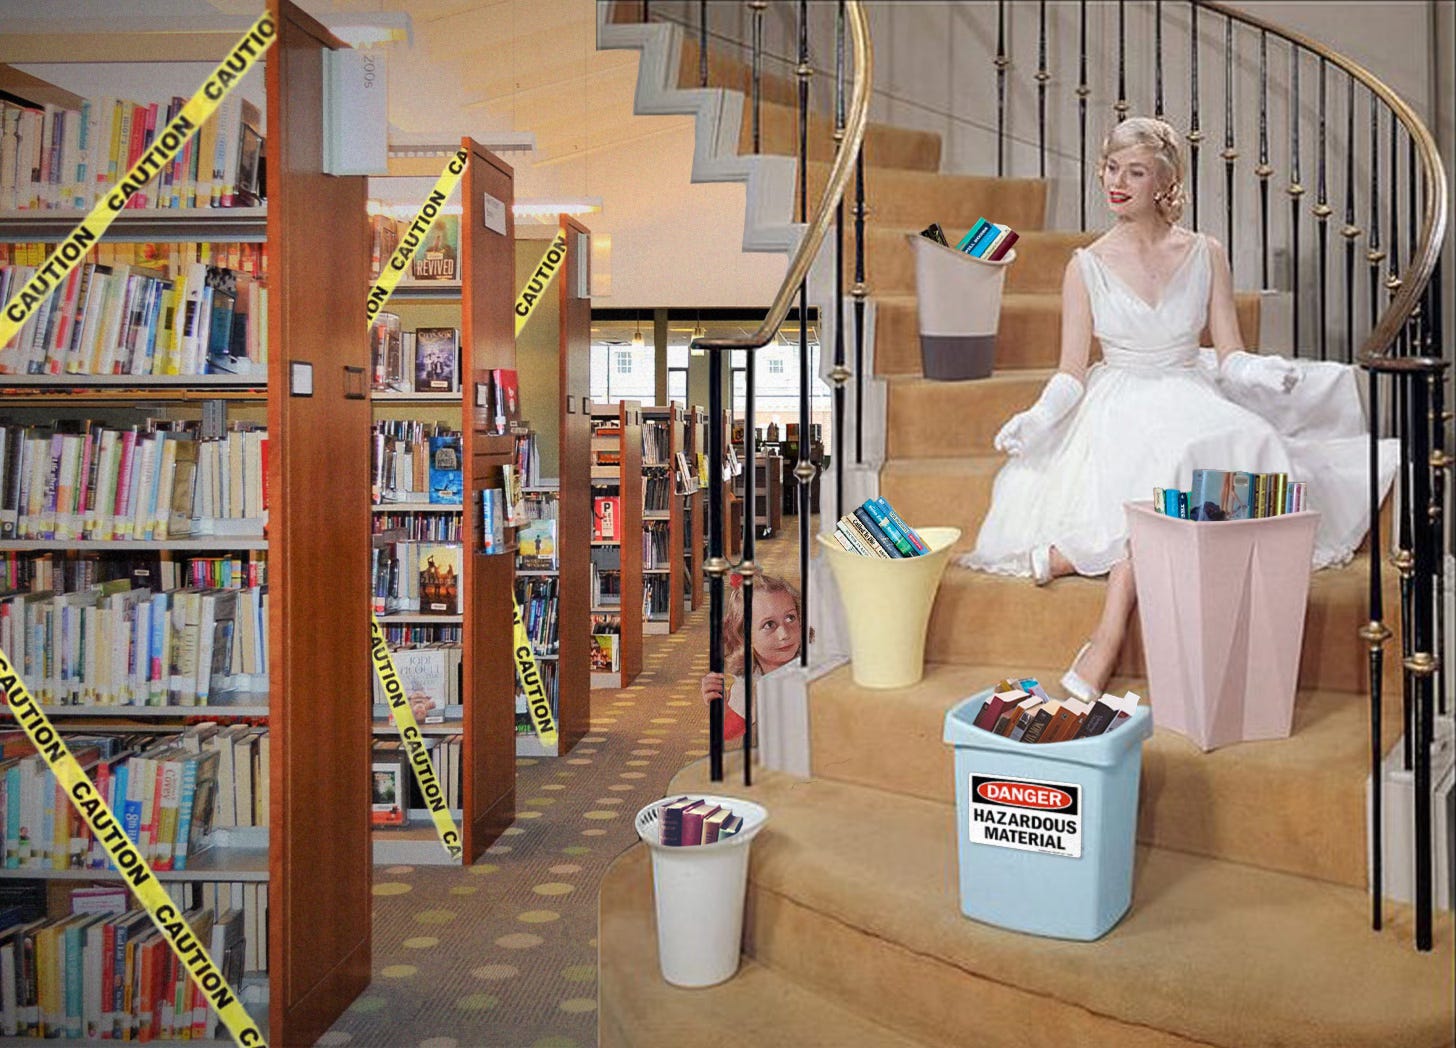 A collage image of the interior of a library with bookshelves crossed by caution tape on one side and a woman sitting on a set of stairs surrounded by trash cans filled with books on the other. A small girl peers up at the woman through the stair's bannister.